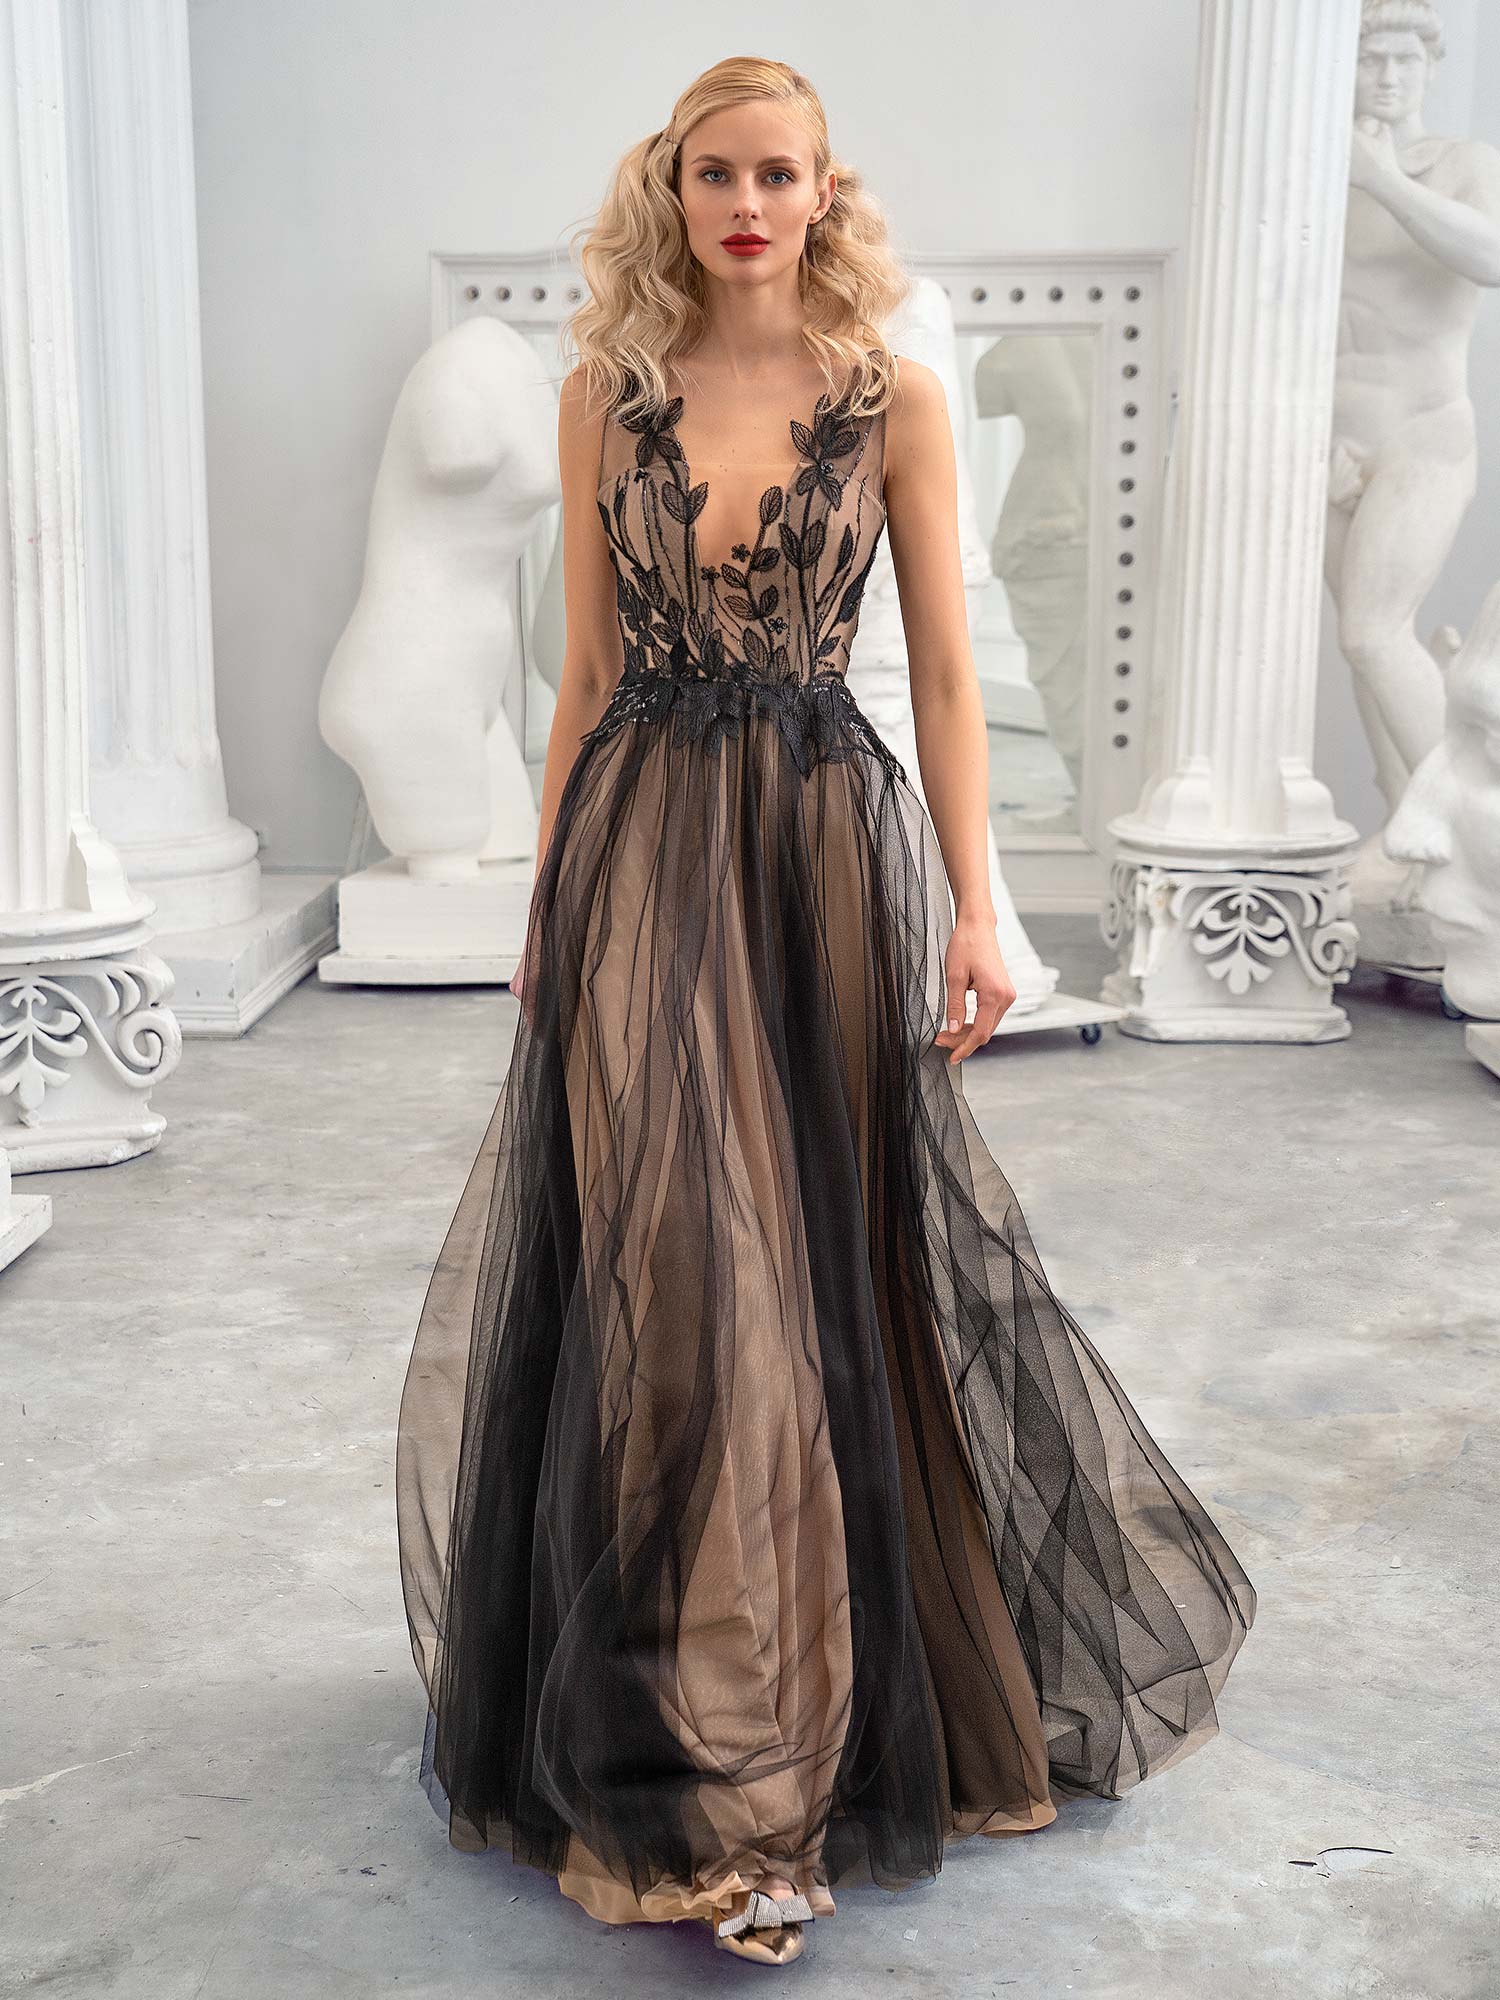 Style #656b, sleeveless A-line formal dress with floral lace top and flowy tulle skirt; available in midi or maxi length; in black-nude, black-powder, ivory, ivory-blue, ivory-powder